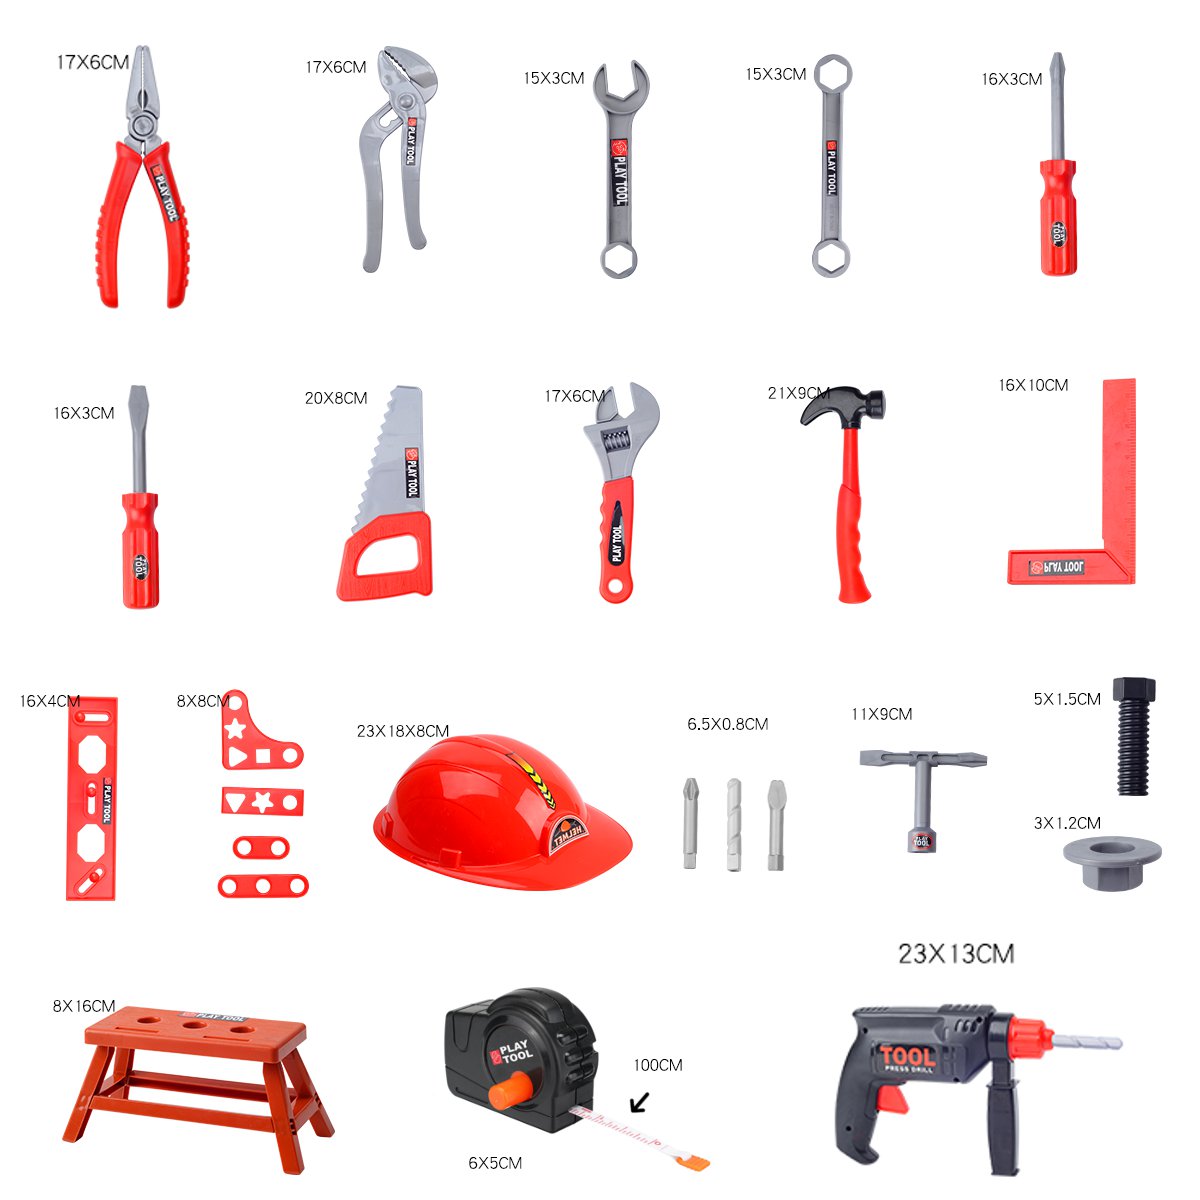 31Pcs-Children-Drill-Tool-Set-Role-Play-Builders-Building-Construction-Toy-Repair-Tool-Kits-1383658